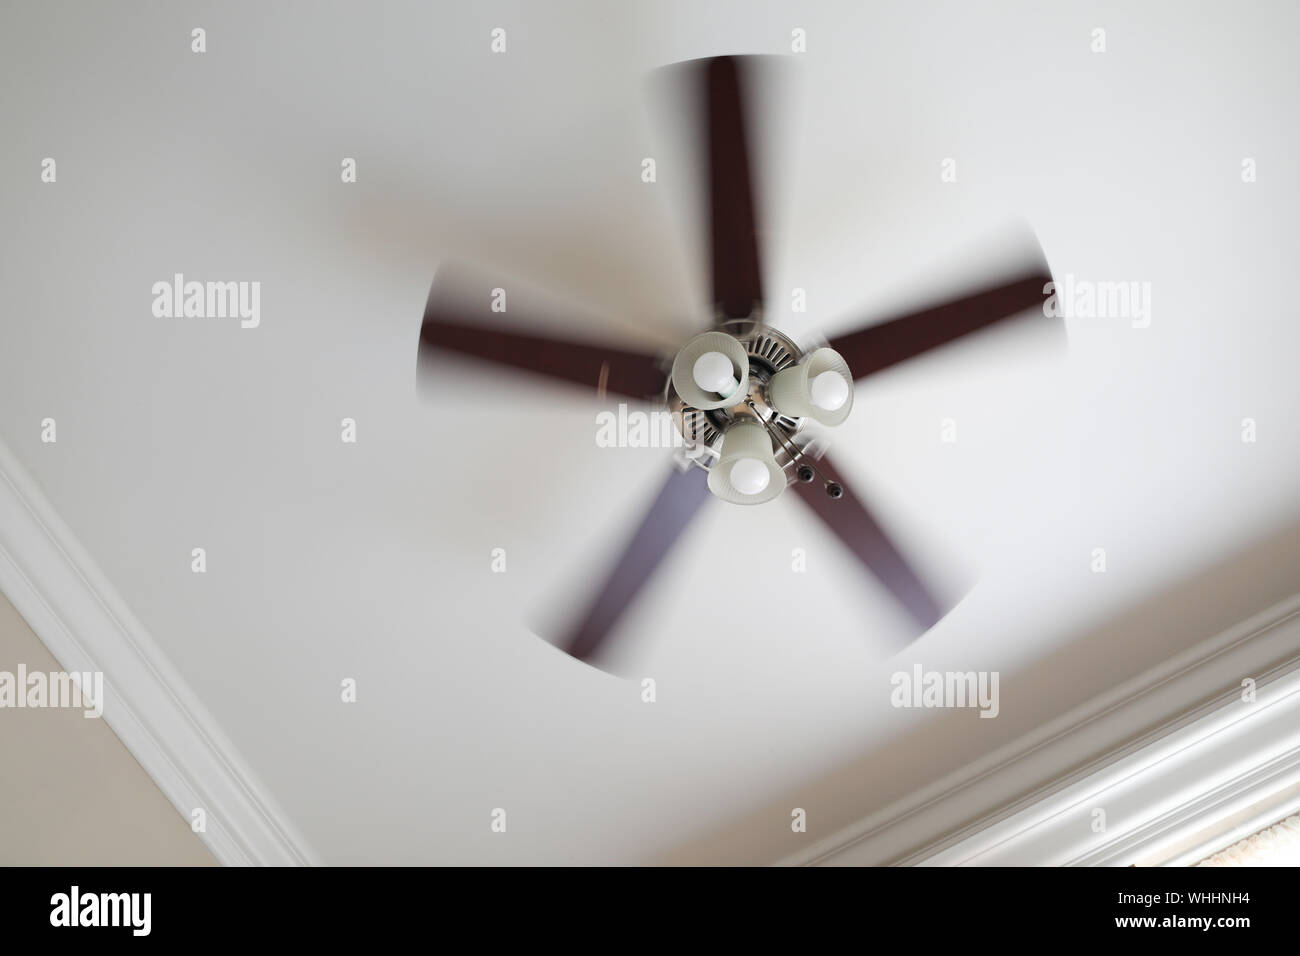 A Working Ceiling Fan On A White Ceiling Close Up With Blurred